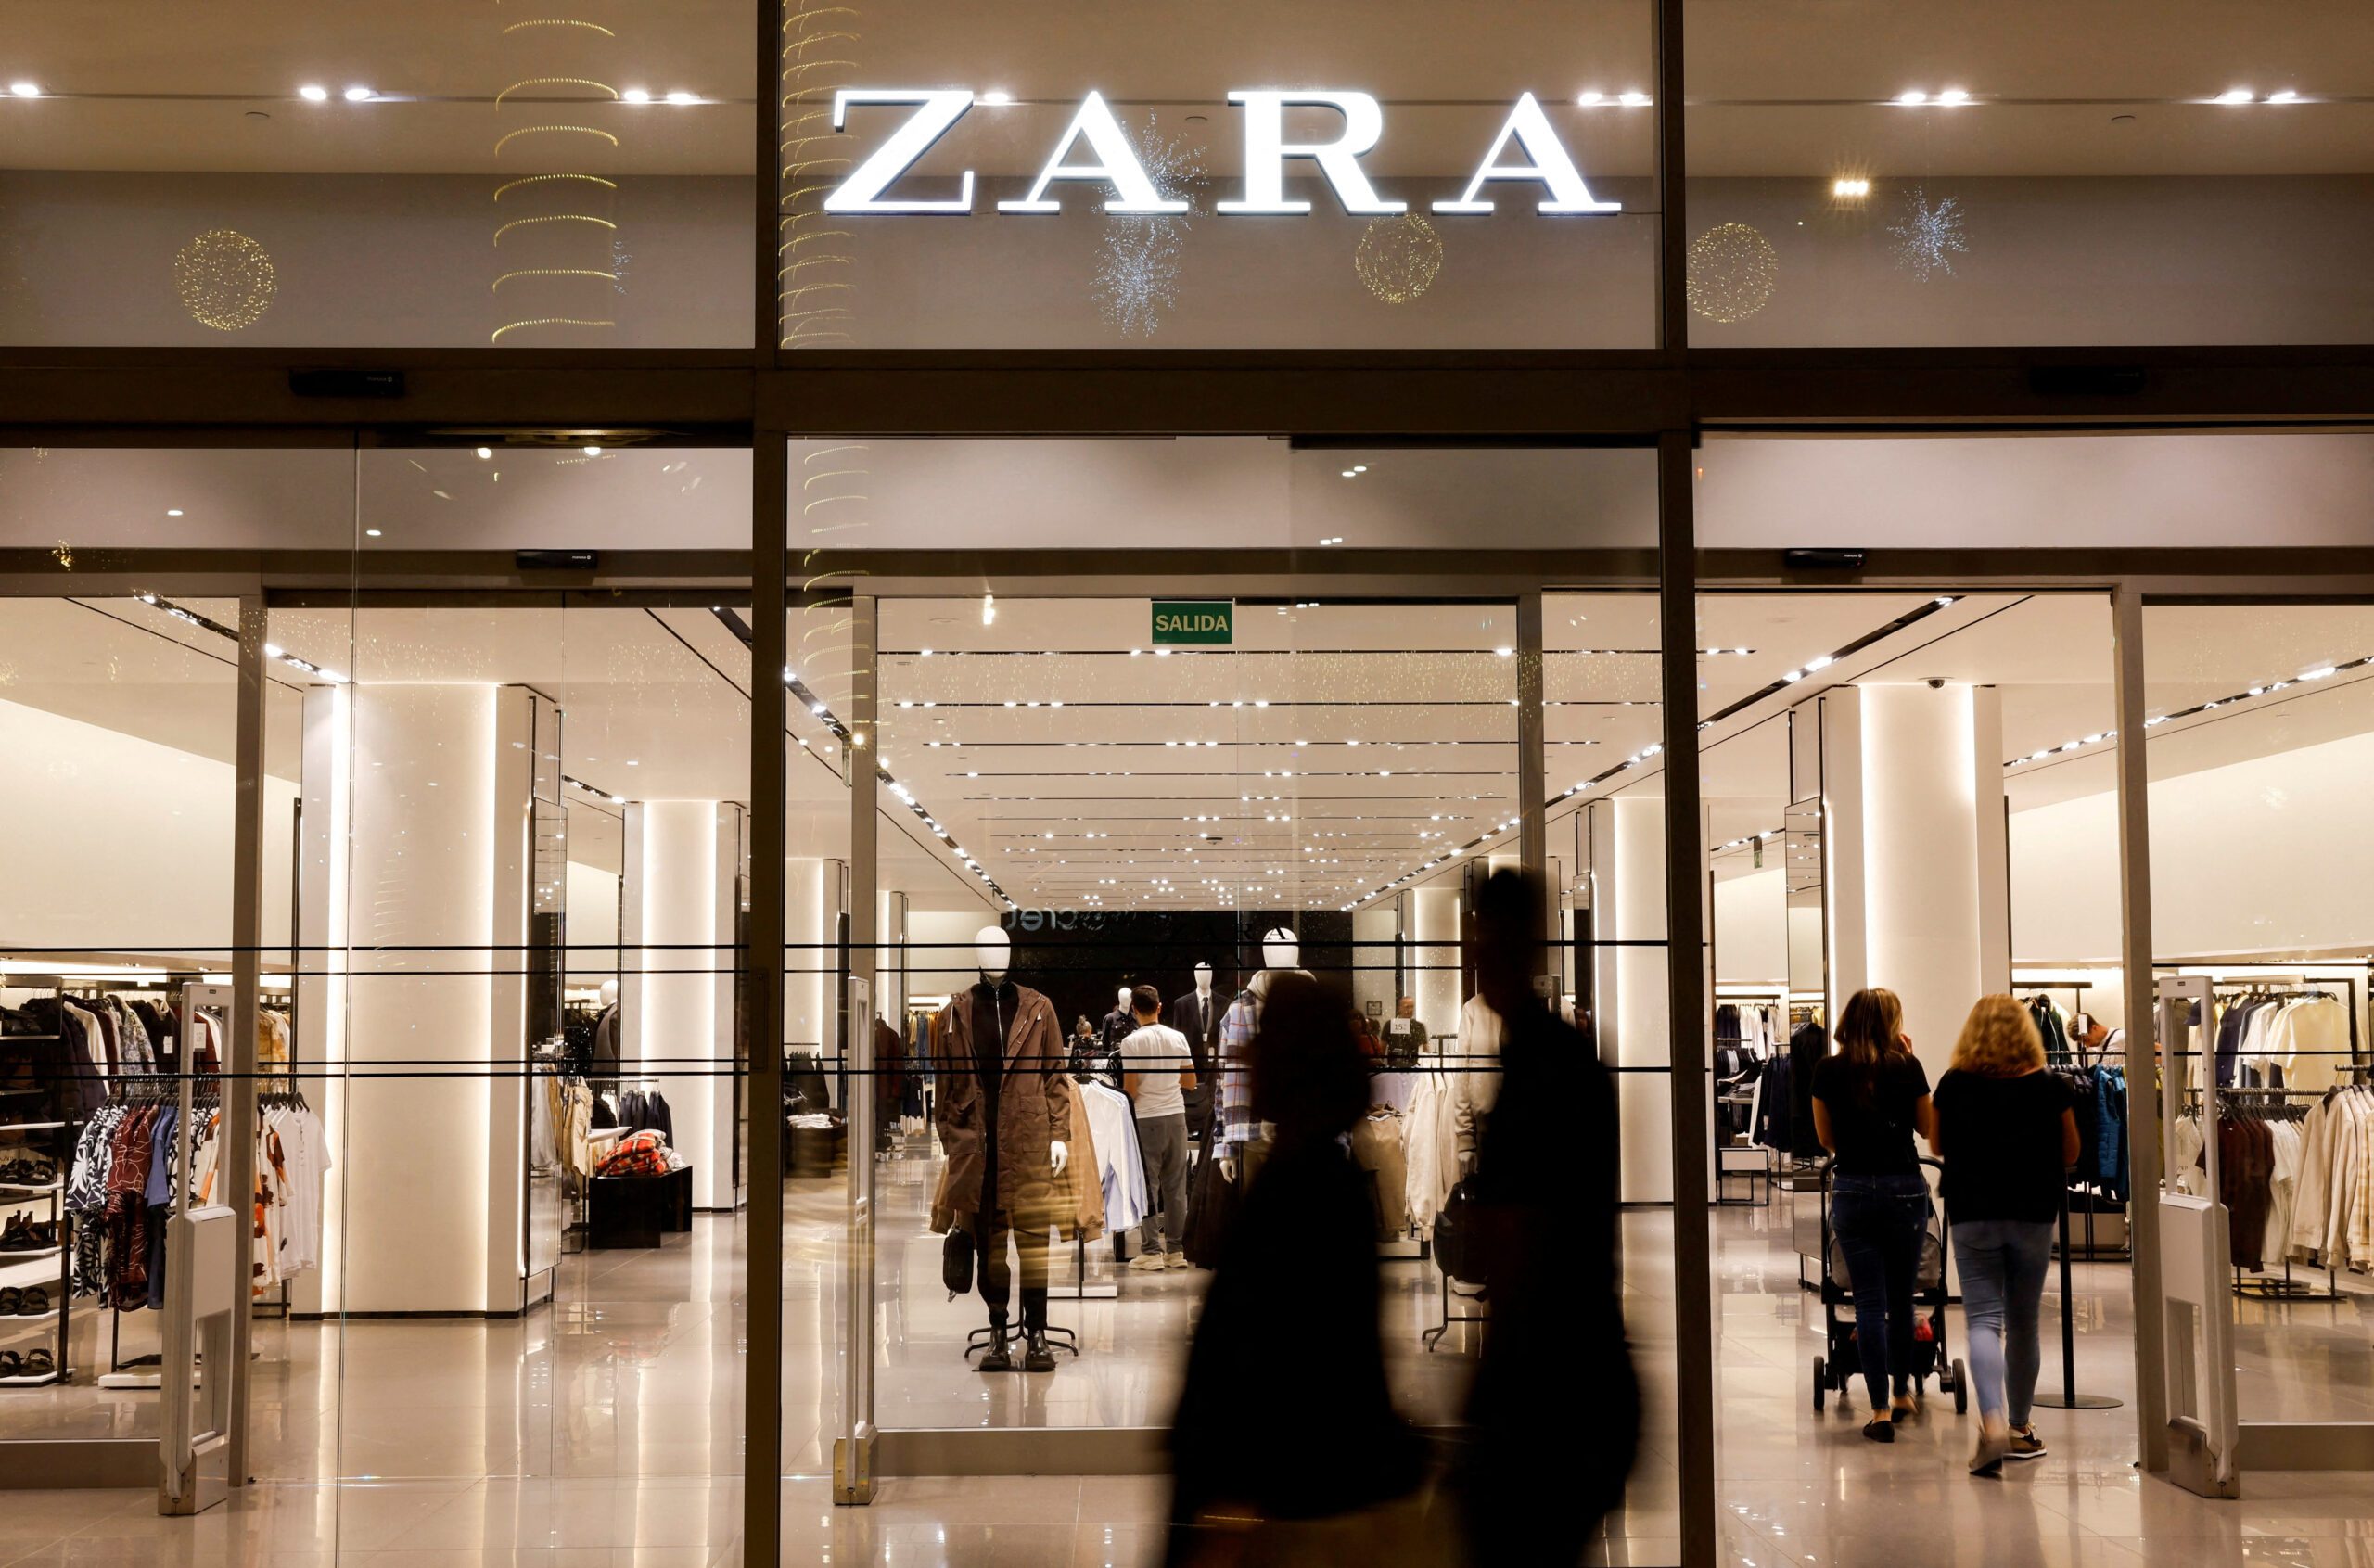 Cenomi Retail franchises Zara in the Middle East